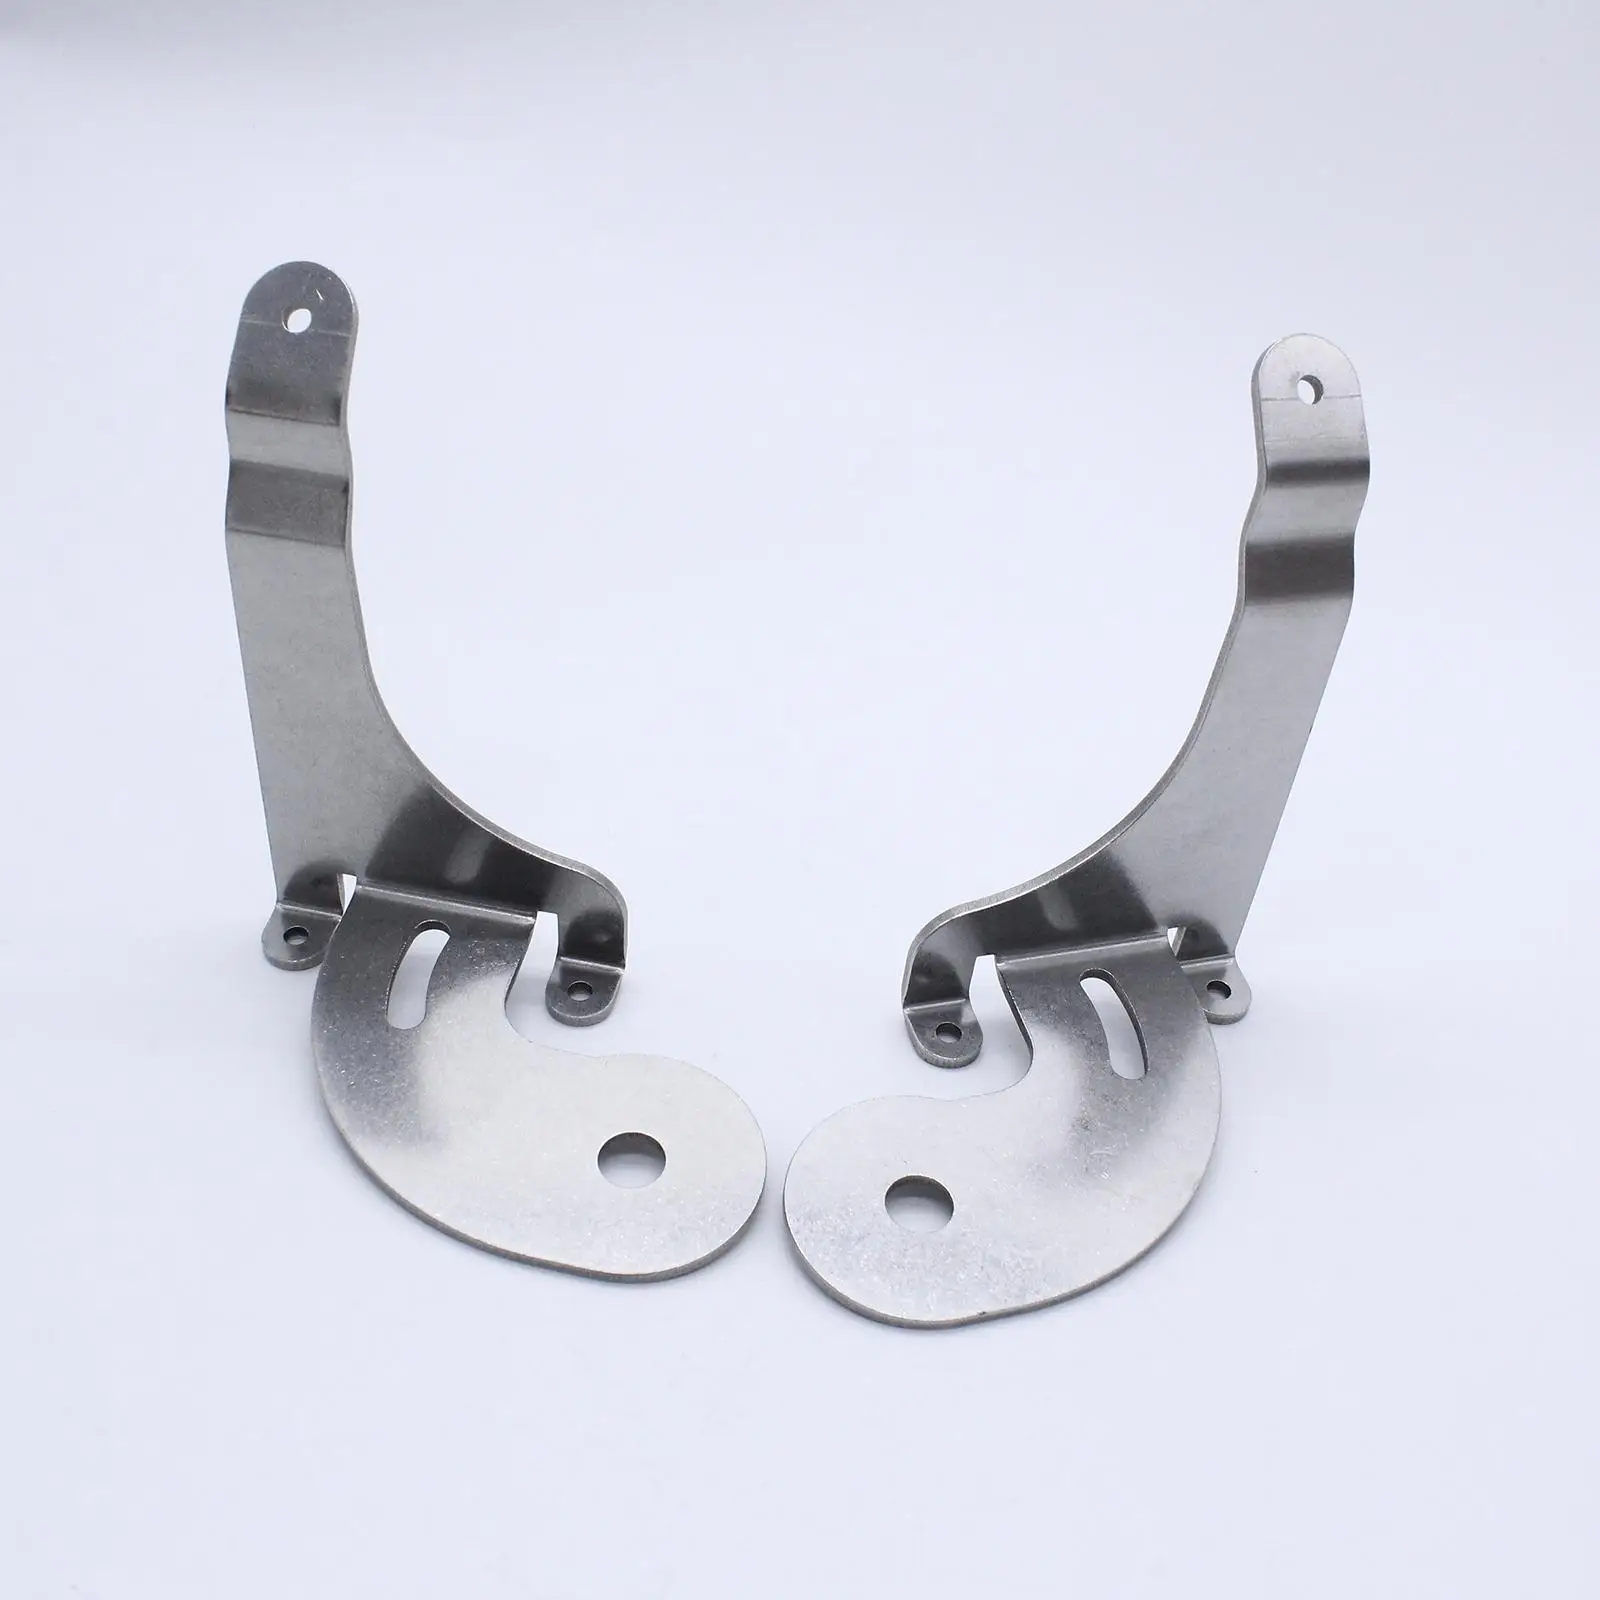 1 Pair Spot Light Brackets Metal Vehicle Replace Spotlamp Fits for BMW Mini S One